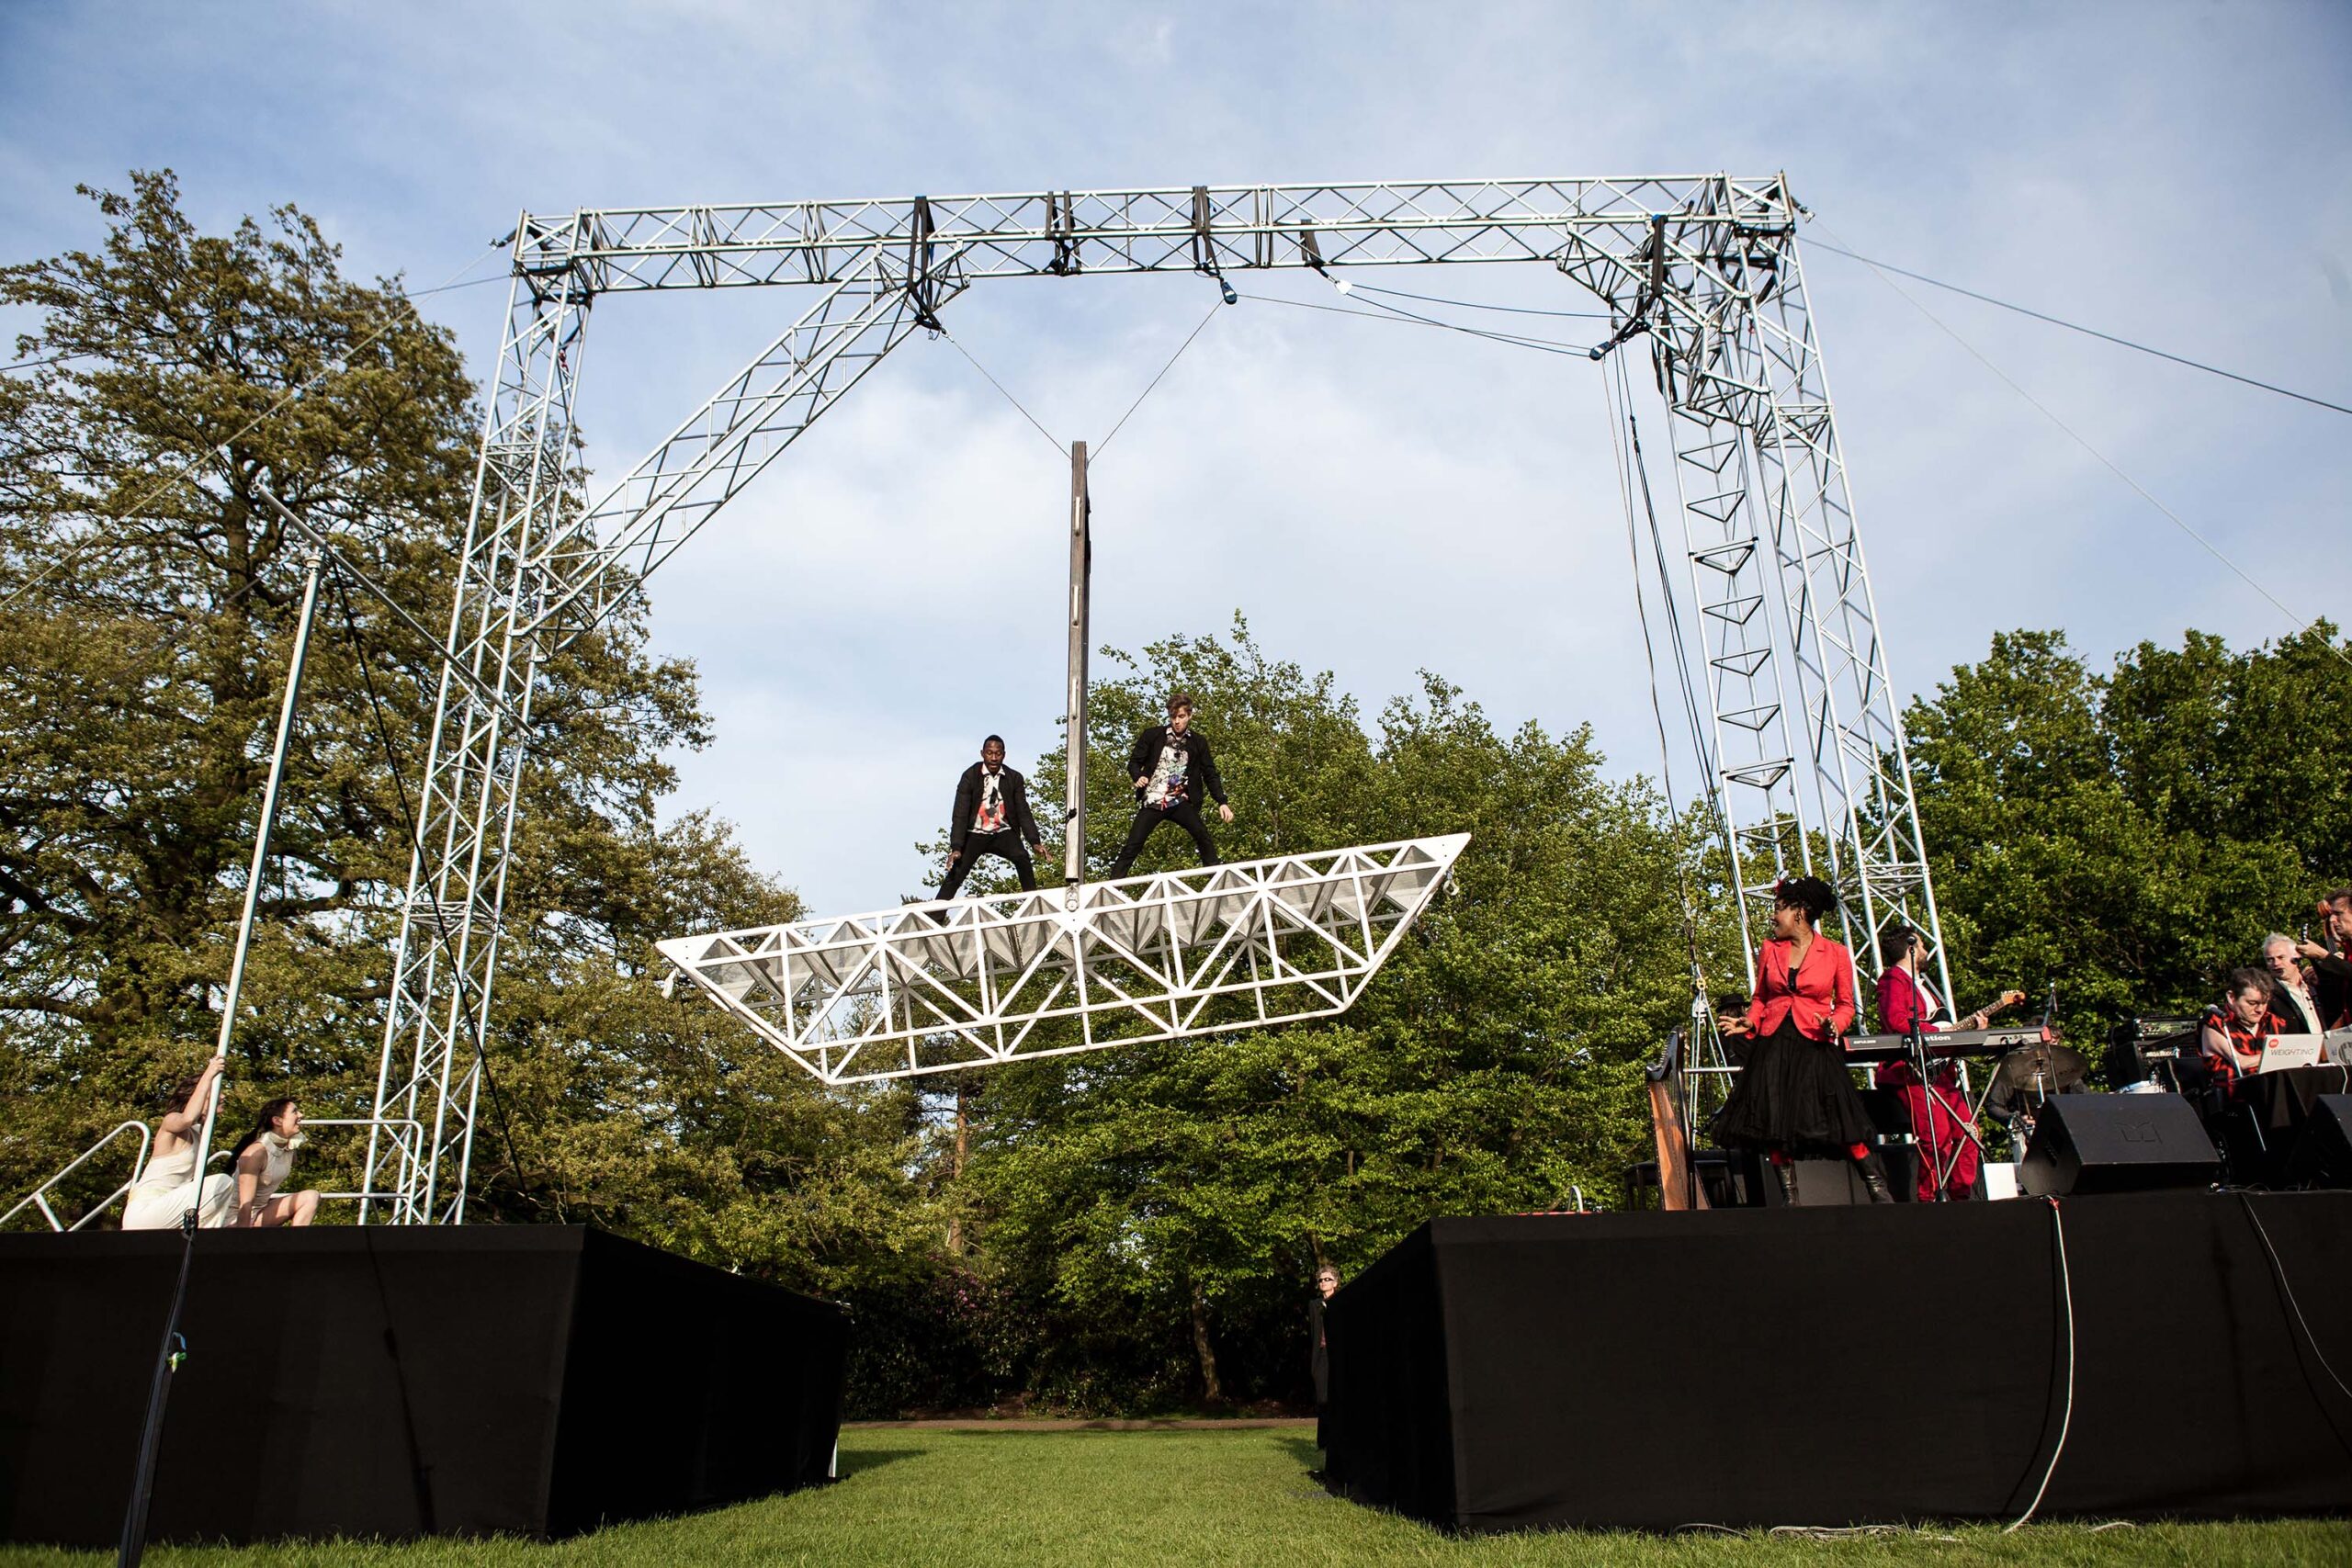 An outdoors circus stage with tall steel rigging. Two men stand on opposite ends of a 6 meters long bridge made of white metal. It is up in the air and acting as a balance, held in its centre by a large metal bar that allows it to balance to the left and to the right.